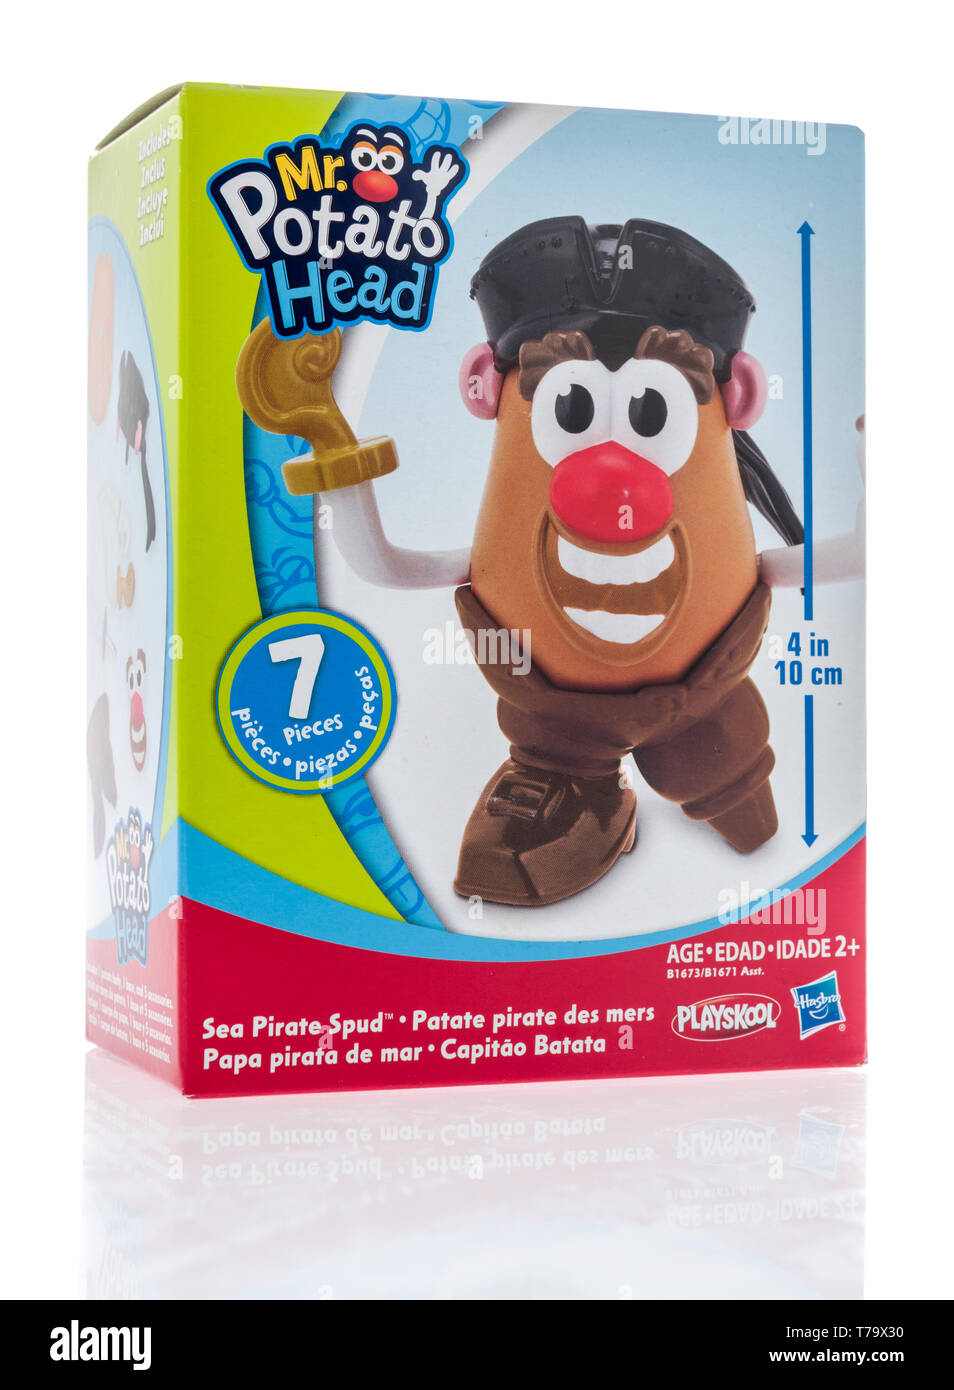 Winneconne, WI -  3 May 2019 : A package of Mr. potato head toy on an isolated background Stock Photo